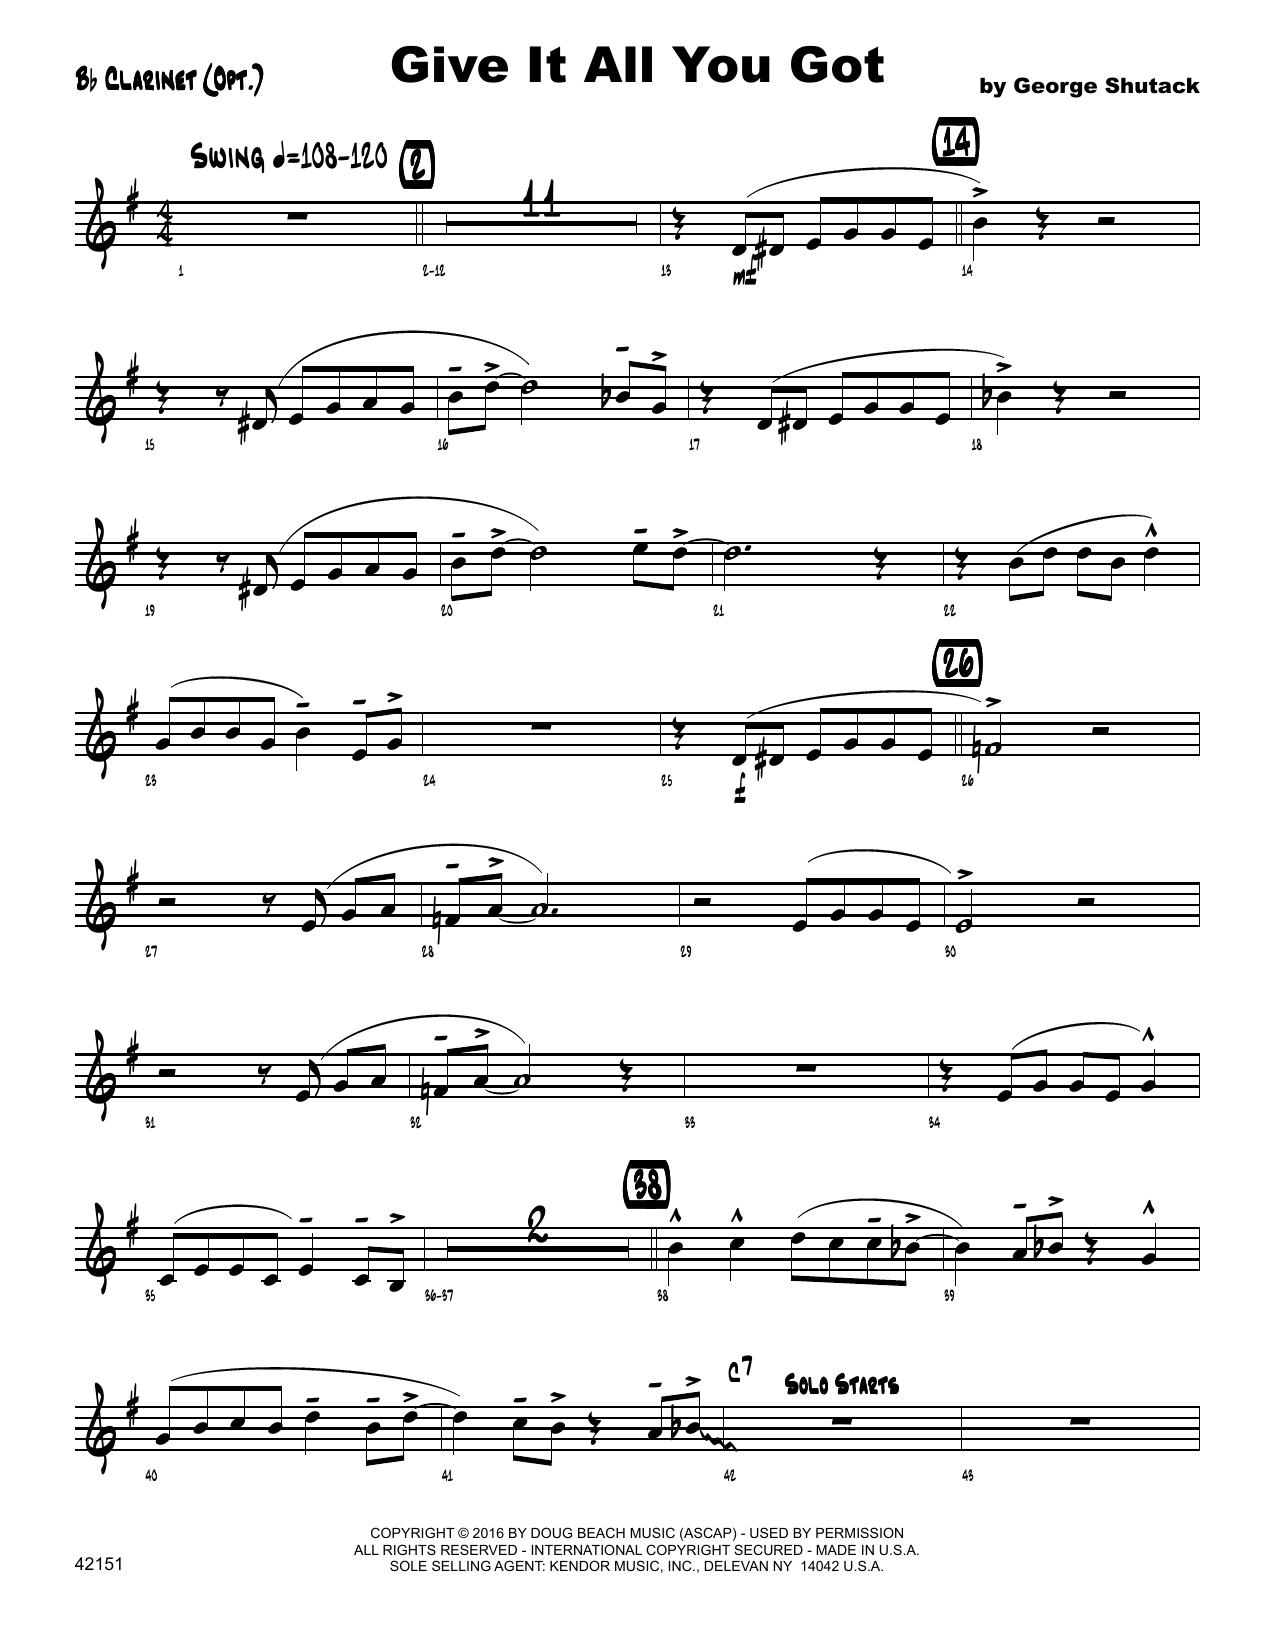 Download George Shutack Give It All You Got - Bb Clarinet Sheet Music